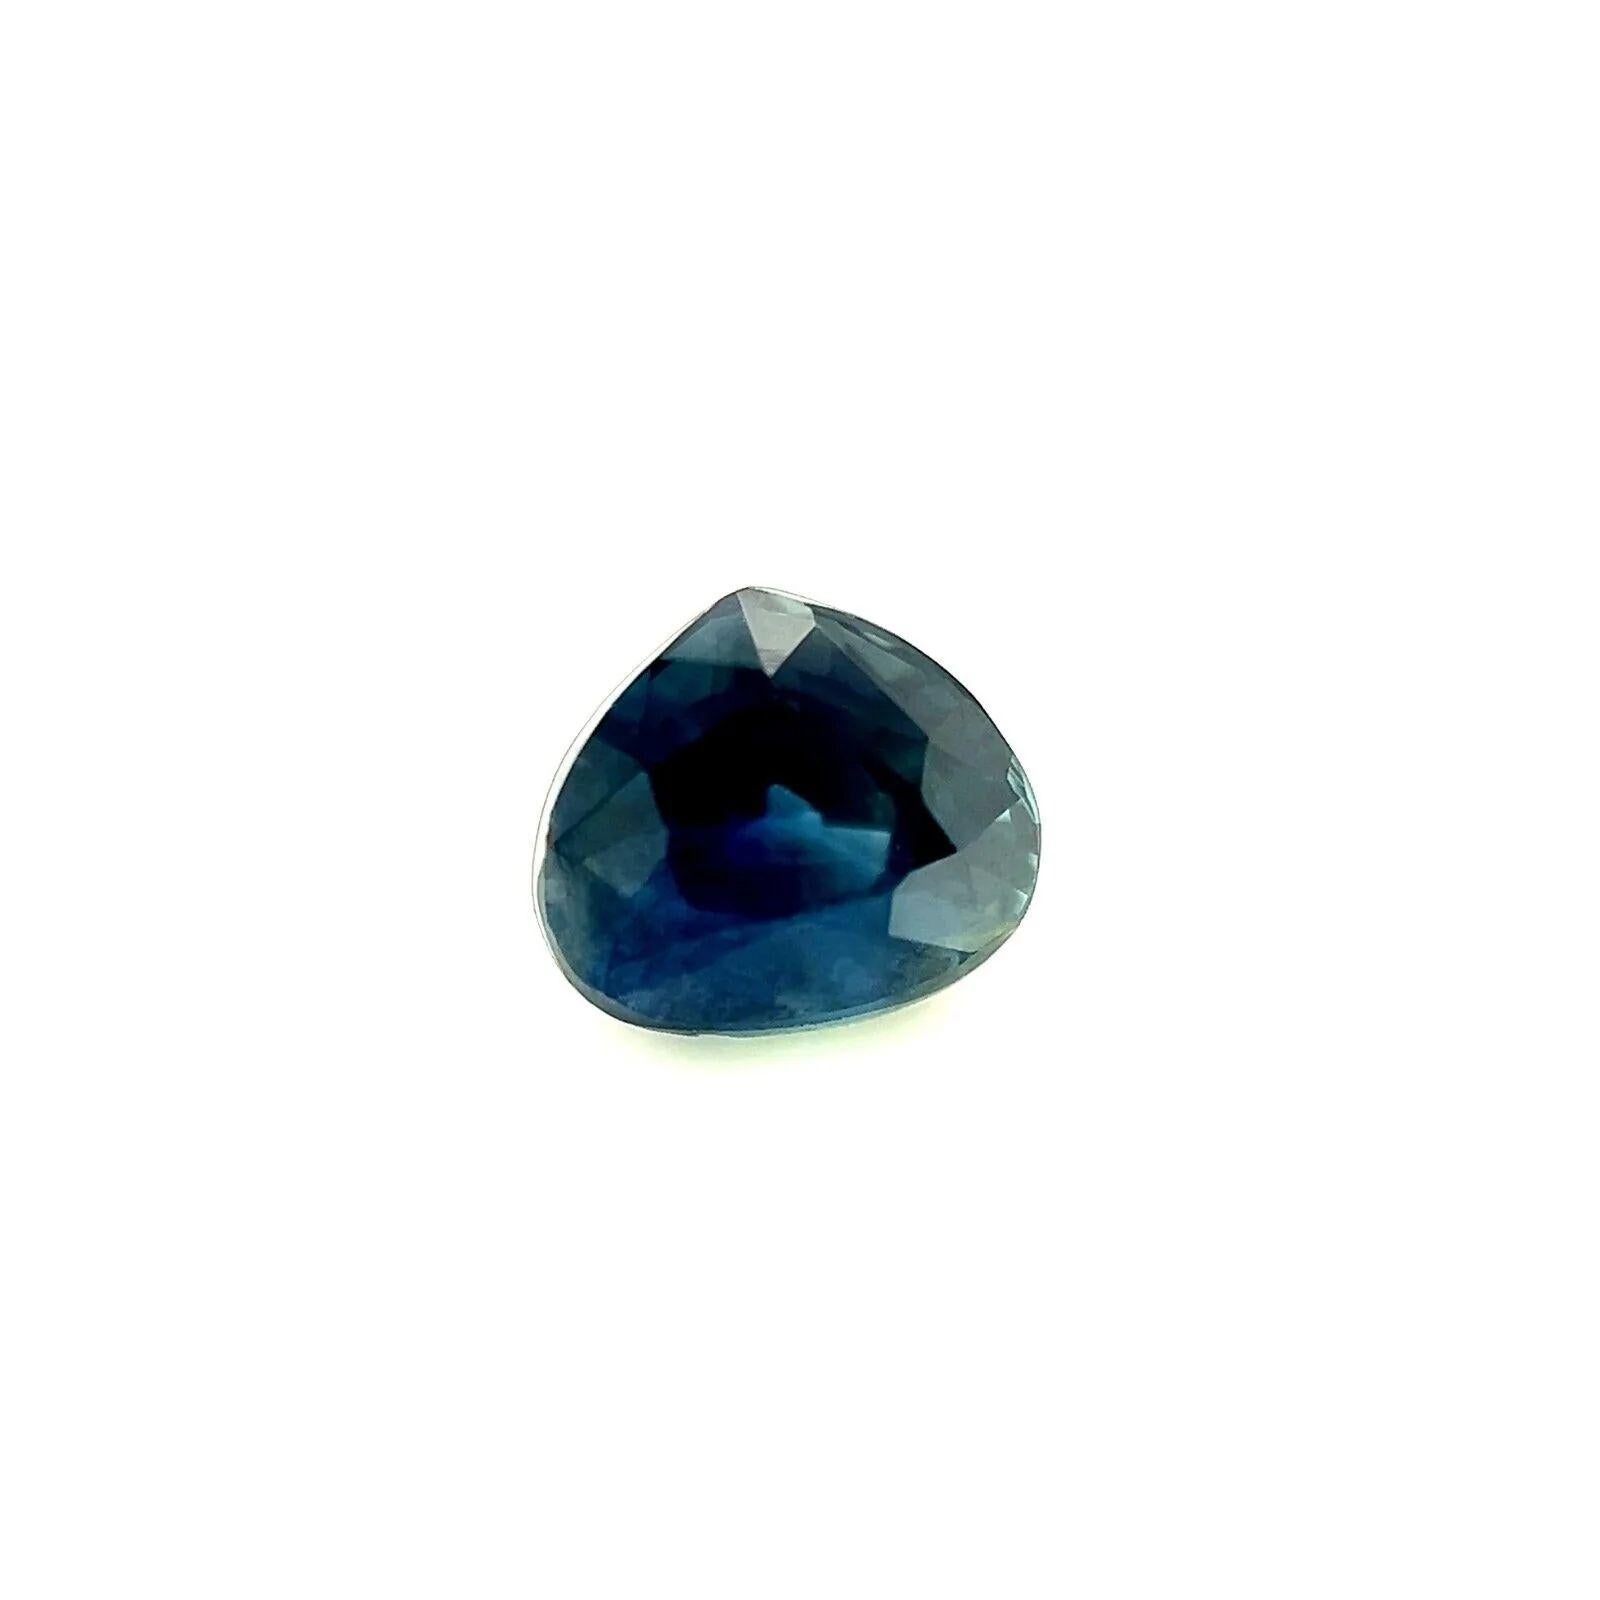 Untreated 0.85ct Natural Sapphire Deep Blue Pear Cut Gem 5.3x4.6mm Vs

Natural Unheated Deep Blue Sapphire Gemstone.
0.85 Carat with a beautiful deep blue colour and a good pear cut.
Also has good clarity, some small natural inclusions visible in